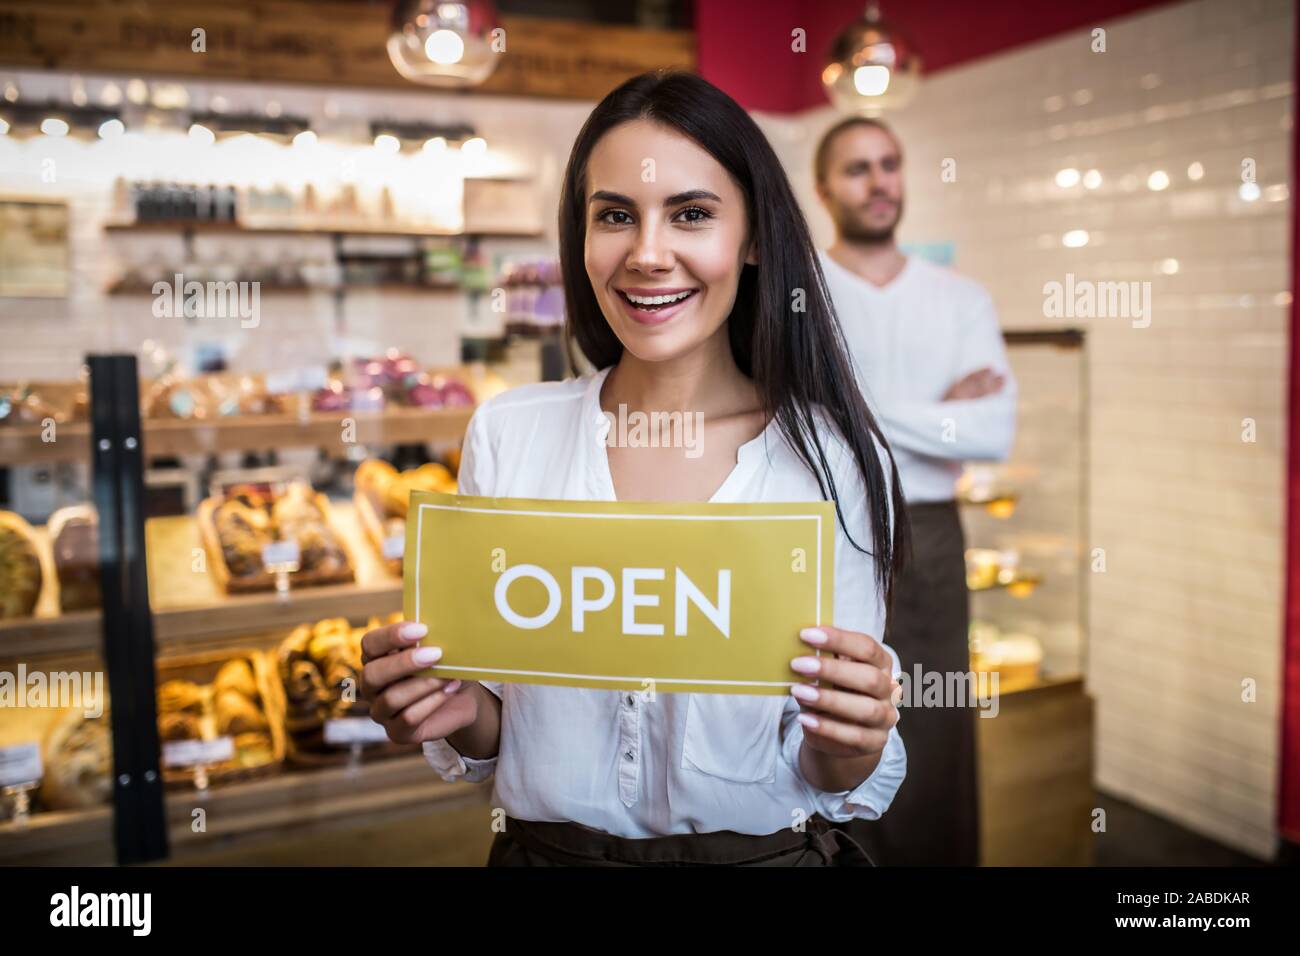 Woman holding open sign while opening pastry shop with husband Stock Photo